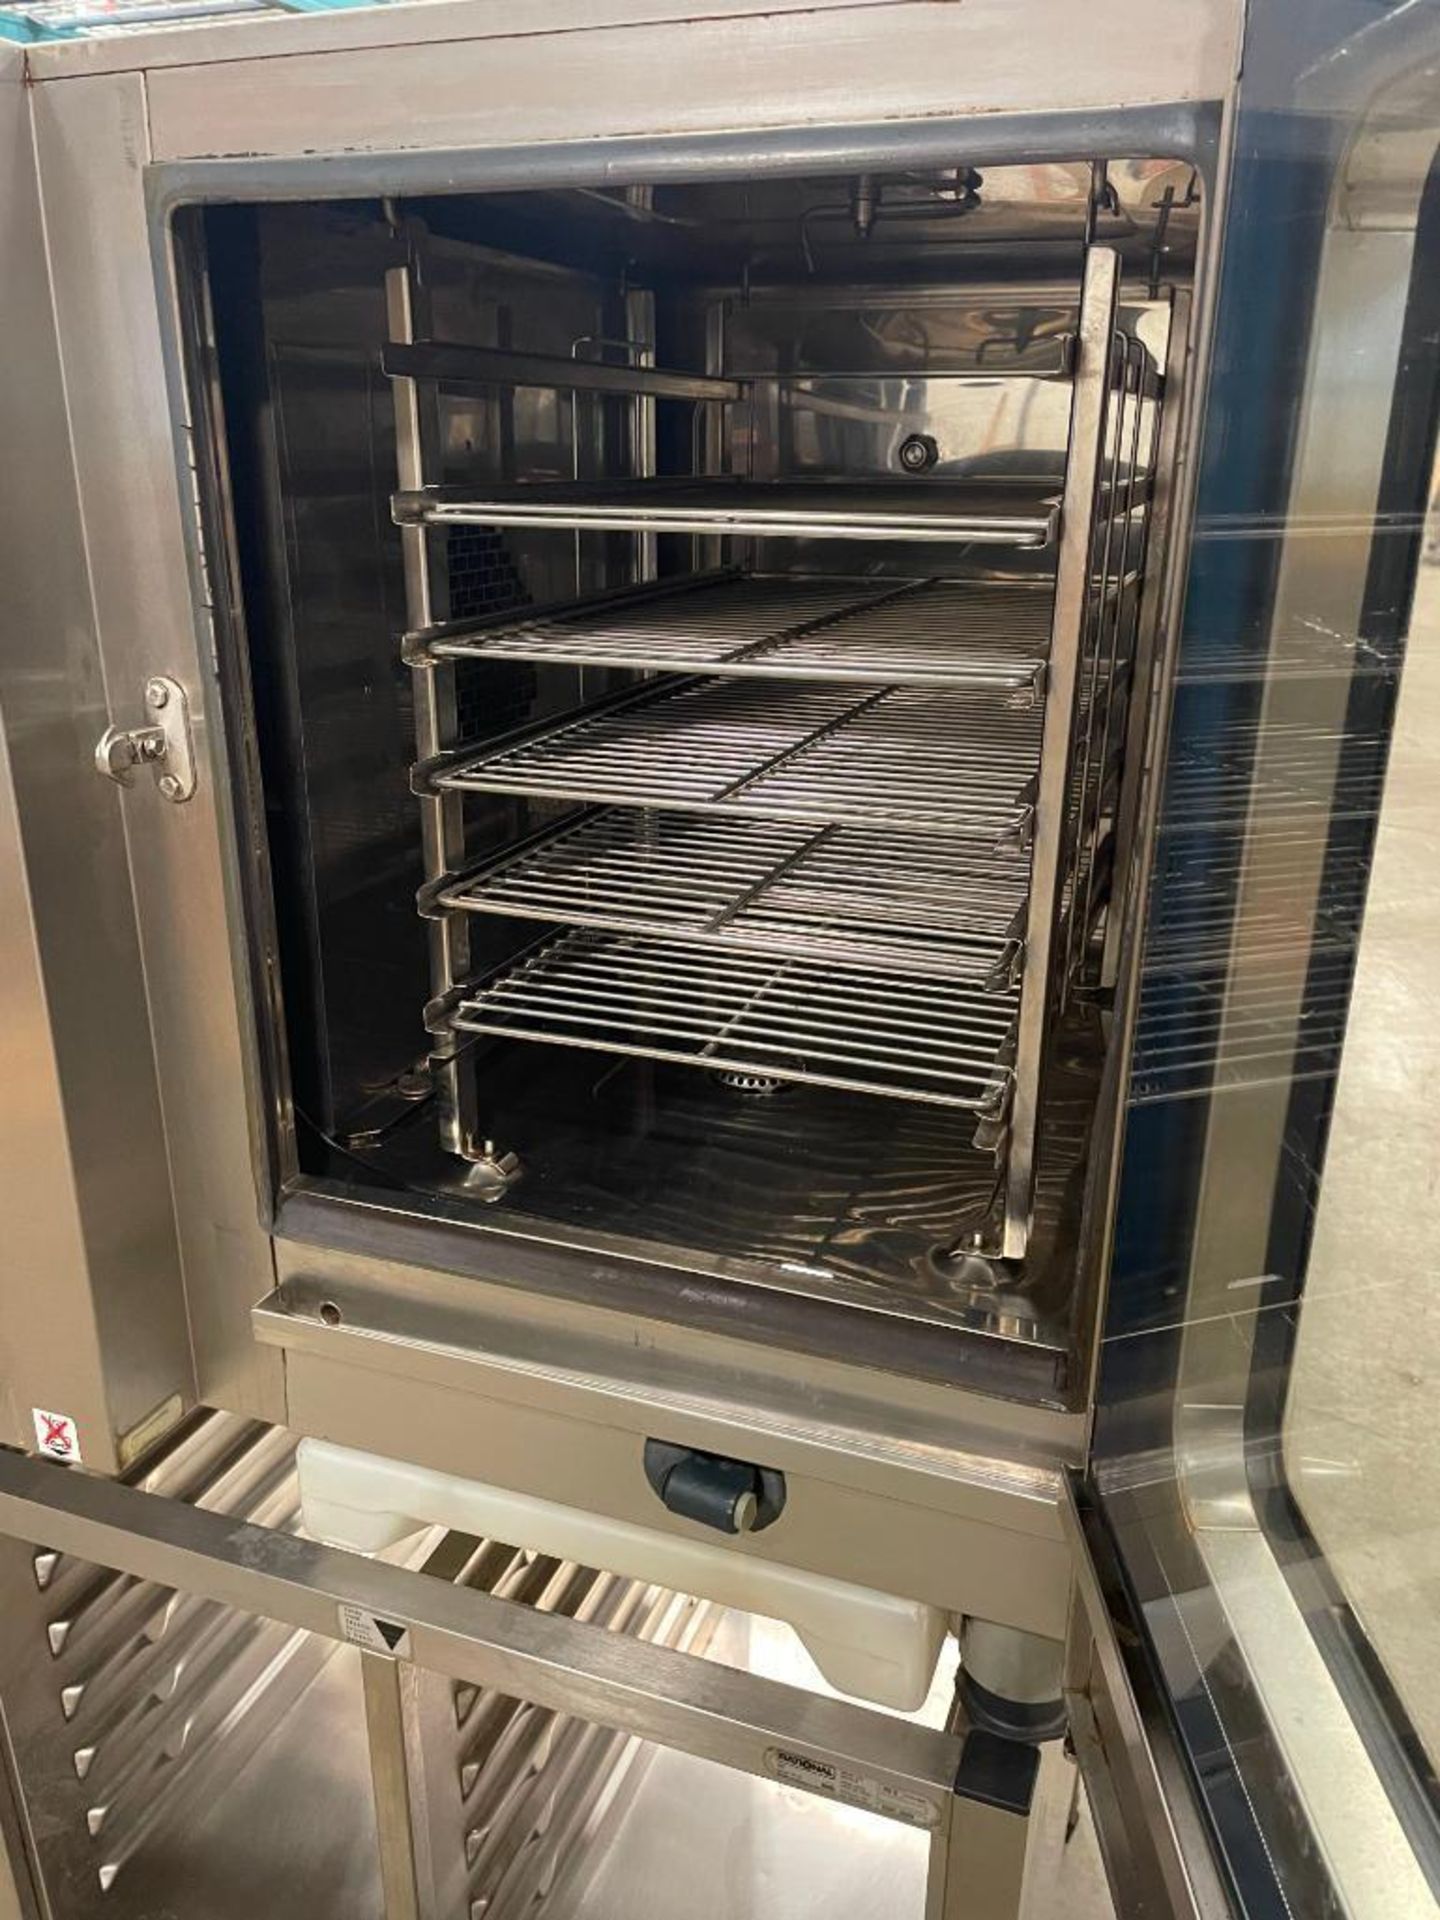 RATIONAL CPC 61 CLIMAPLUS COMBI OVEN - Image 9 of 15